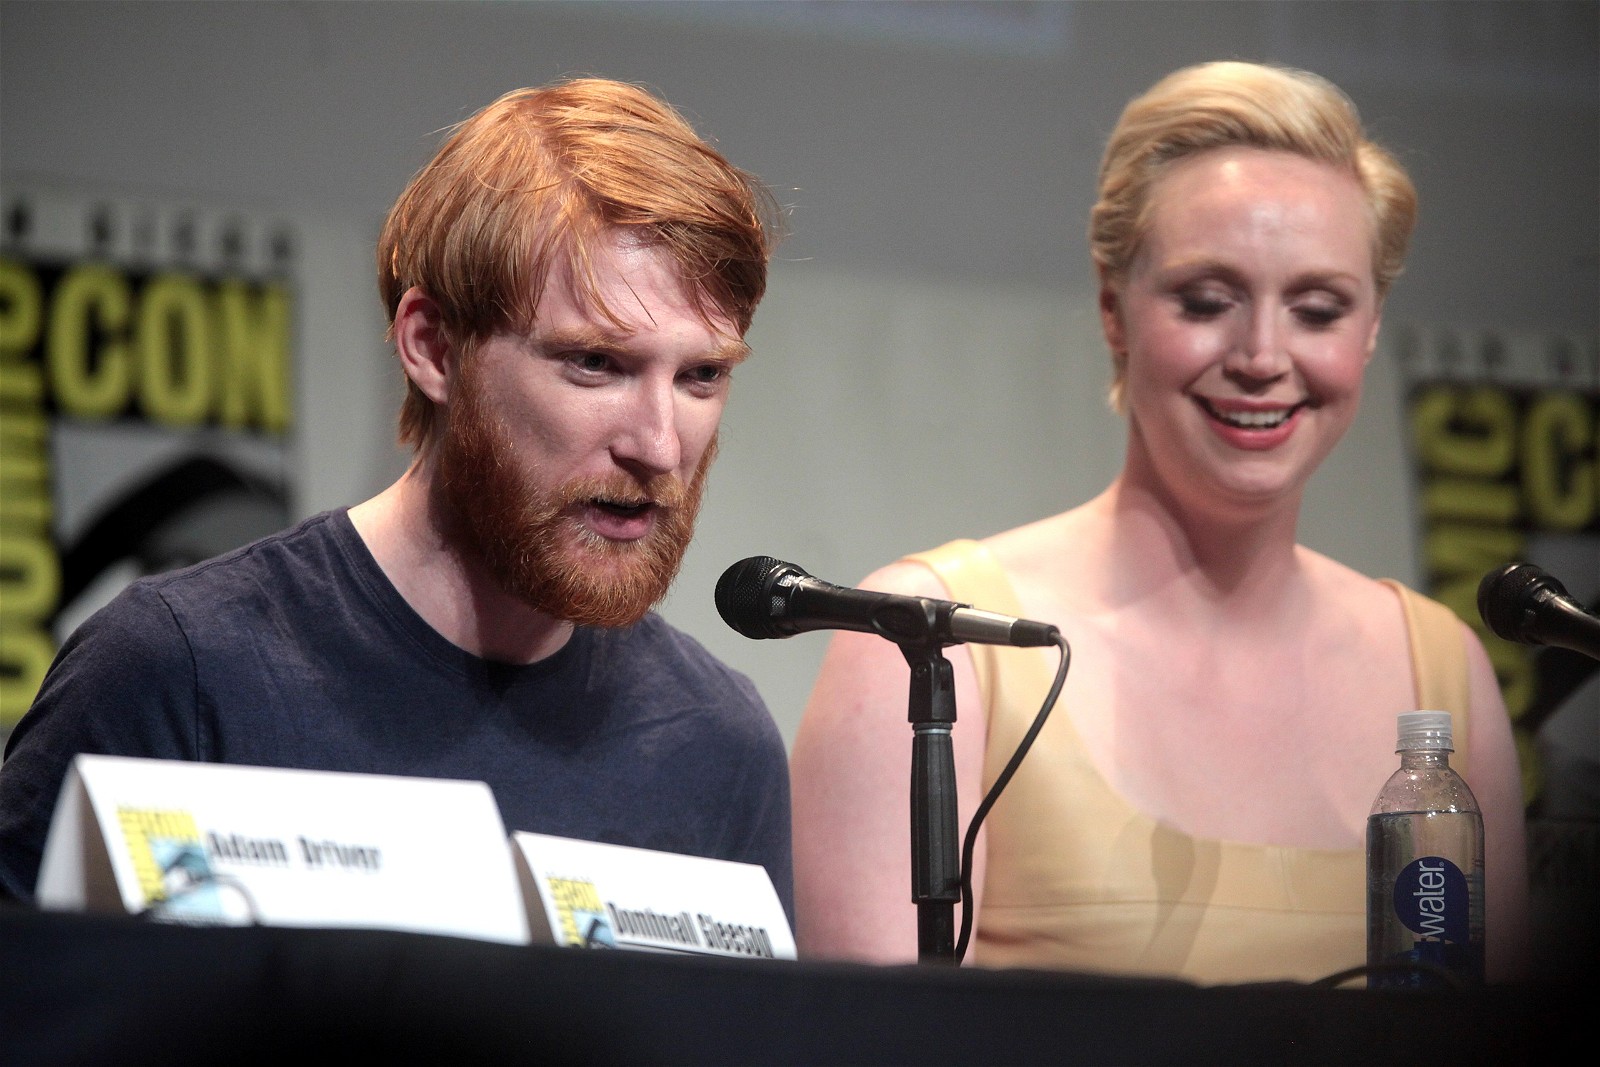 Domhnall Gleeson and Gwendoline Christie speaking at the 2015 San Diego Comic Con International | Gage Skidmore for Wikimedia Commons